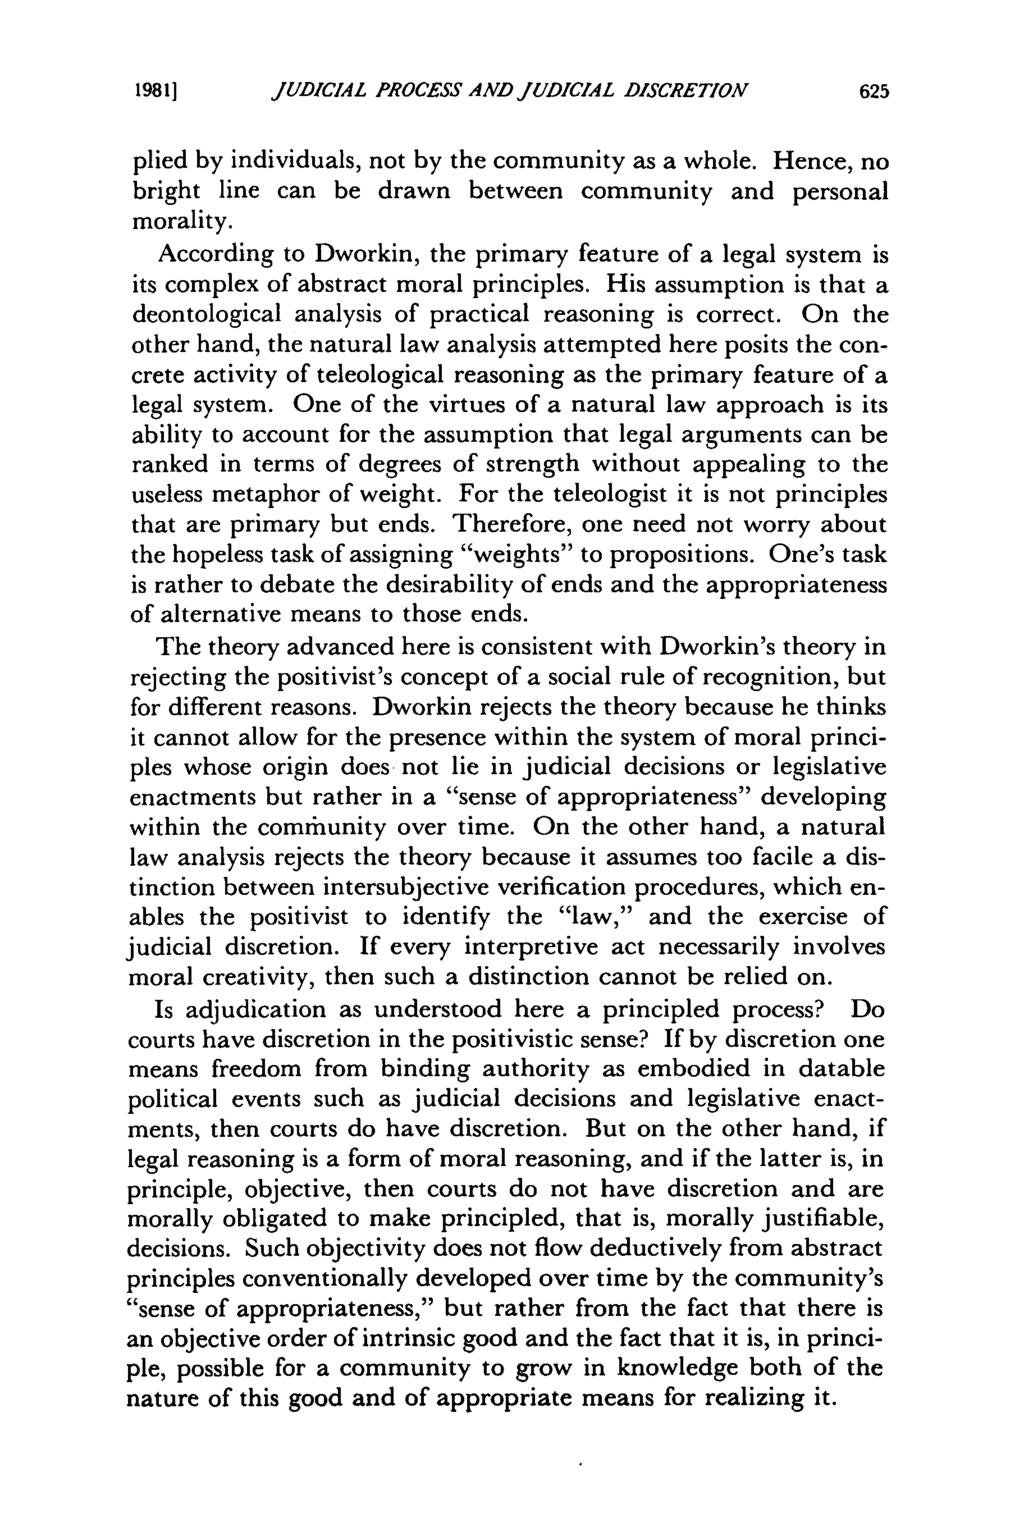 19811 Pannier: The Nature of the Judicial Process and Judicial Discretion JUDICIAL PROCESS AND JUDICIAL DISCRETION plied by individuals, not by the community as a whole.